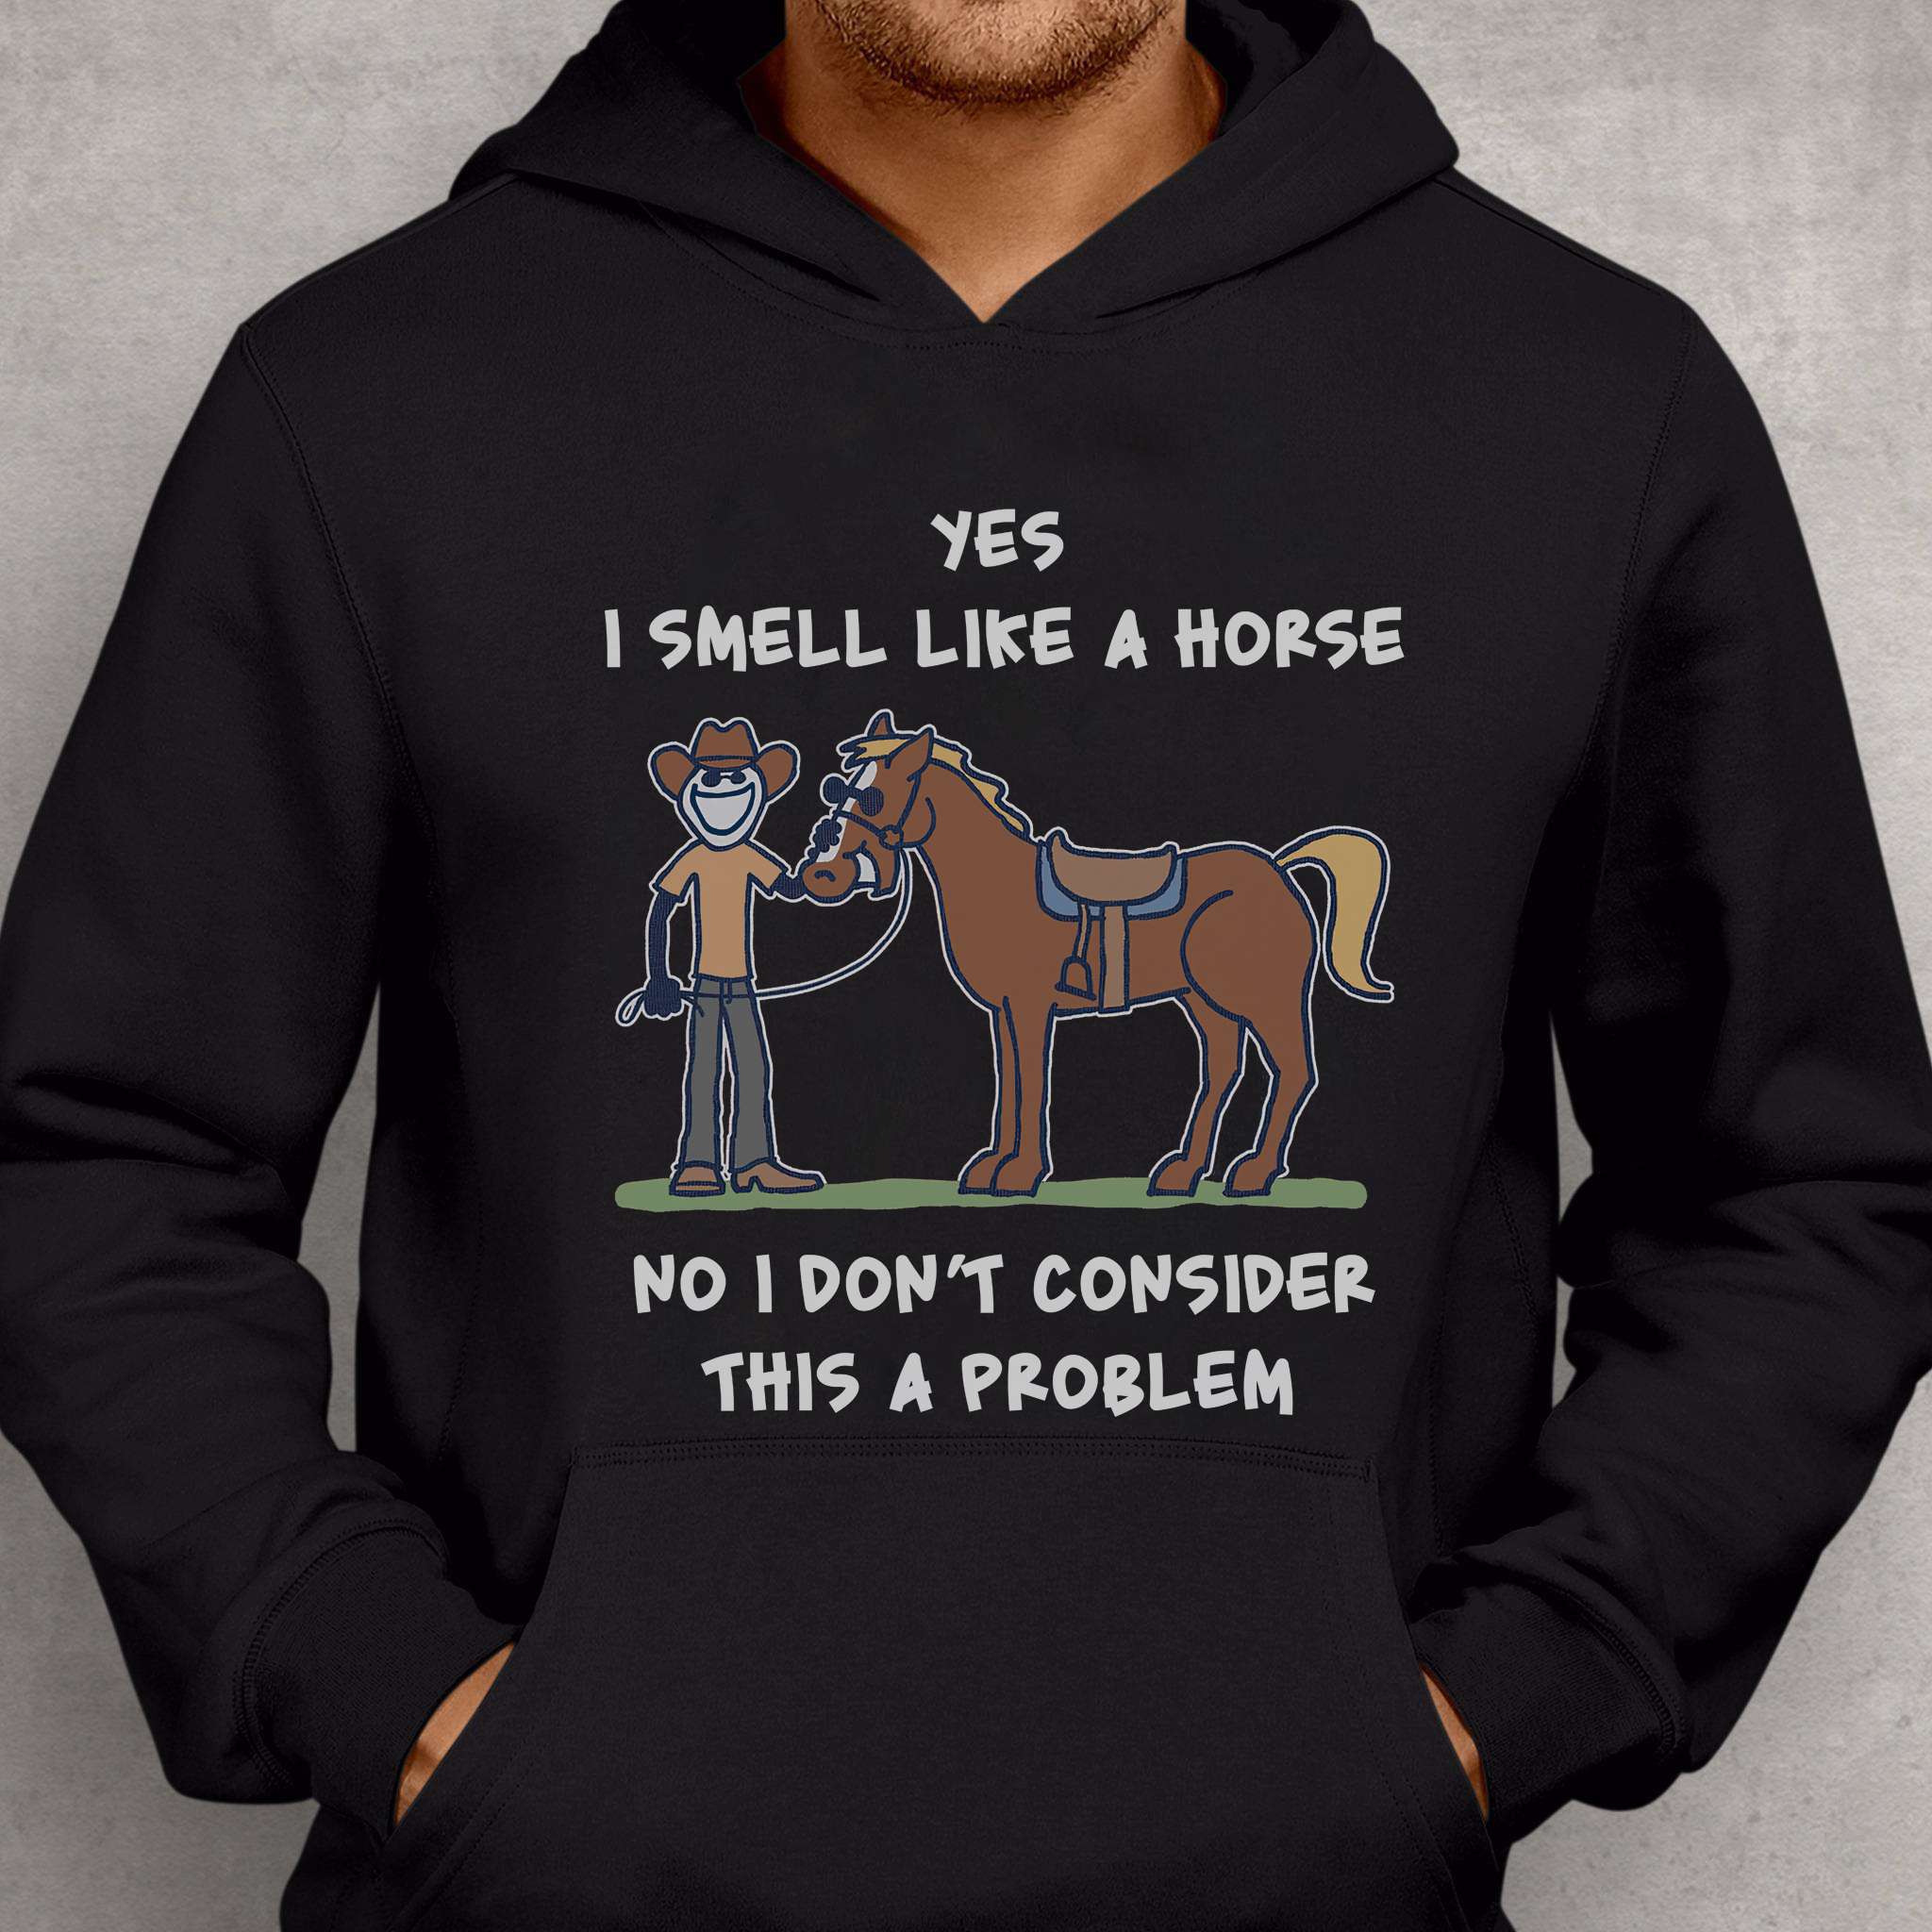 Yes I smell like a horse - No I don't consider this a problem, horse lover gift